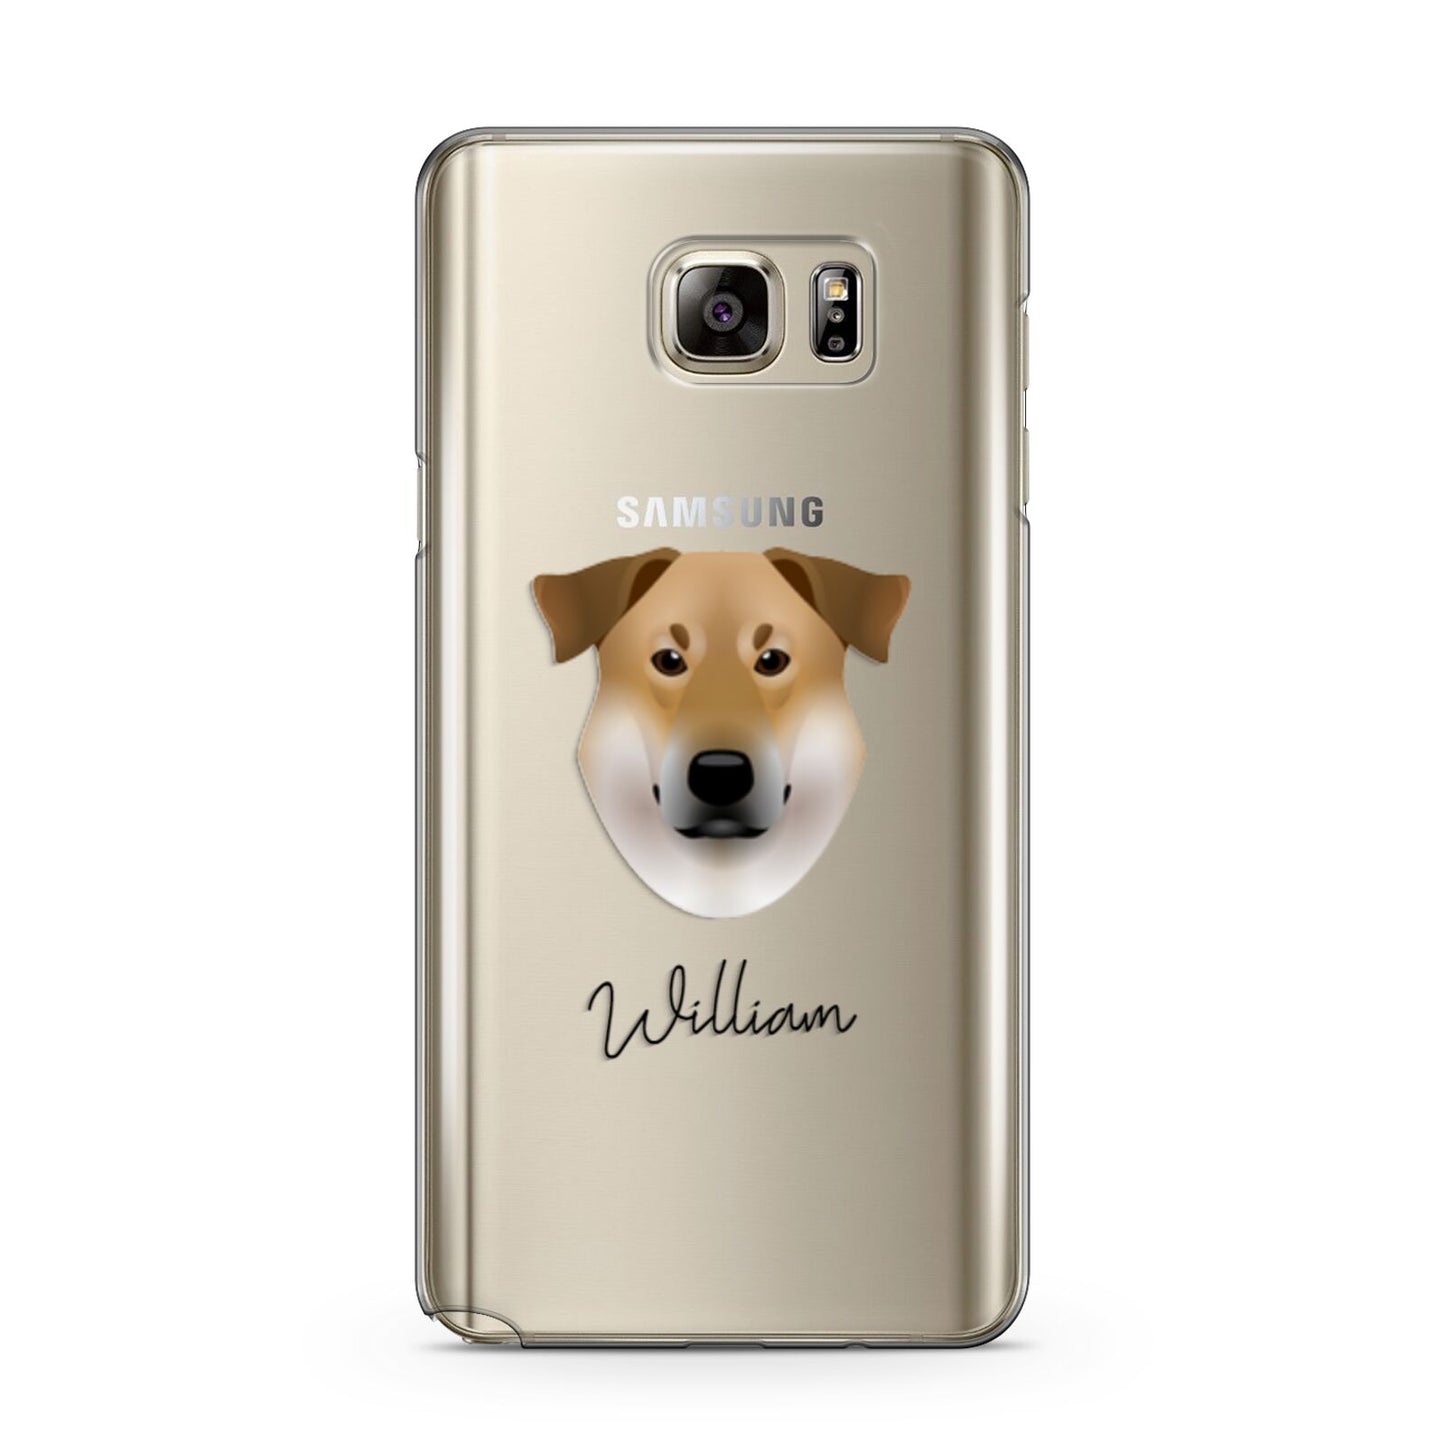 Chinook Personalised Samsung Galaxy Note 5 Case